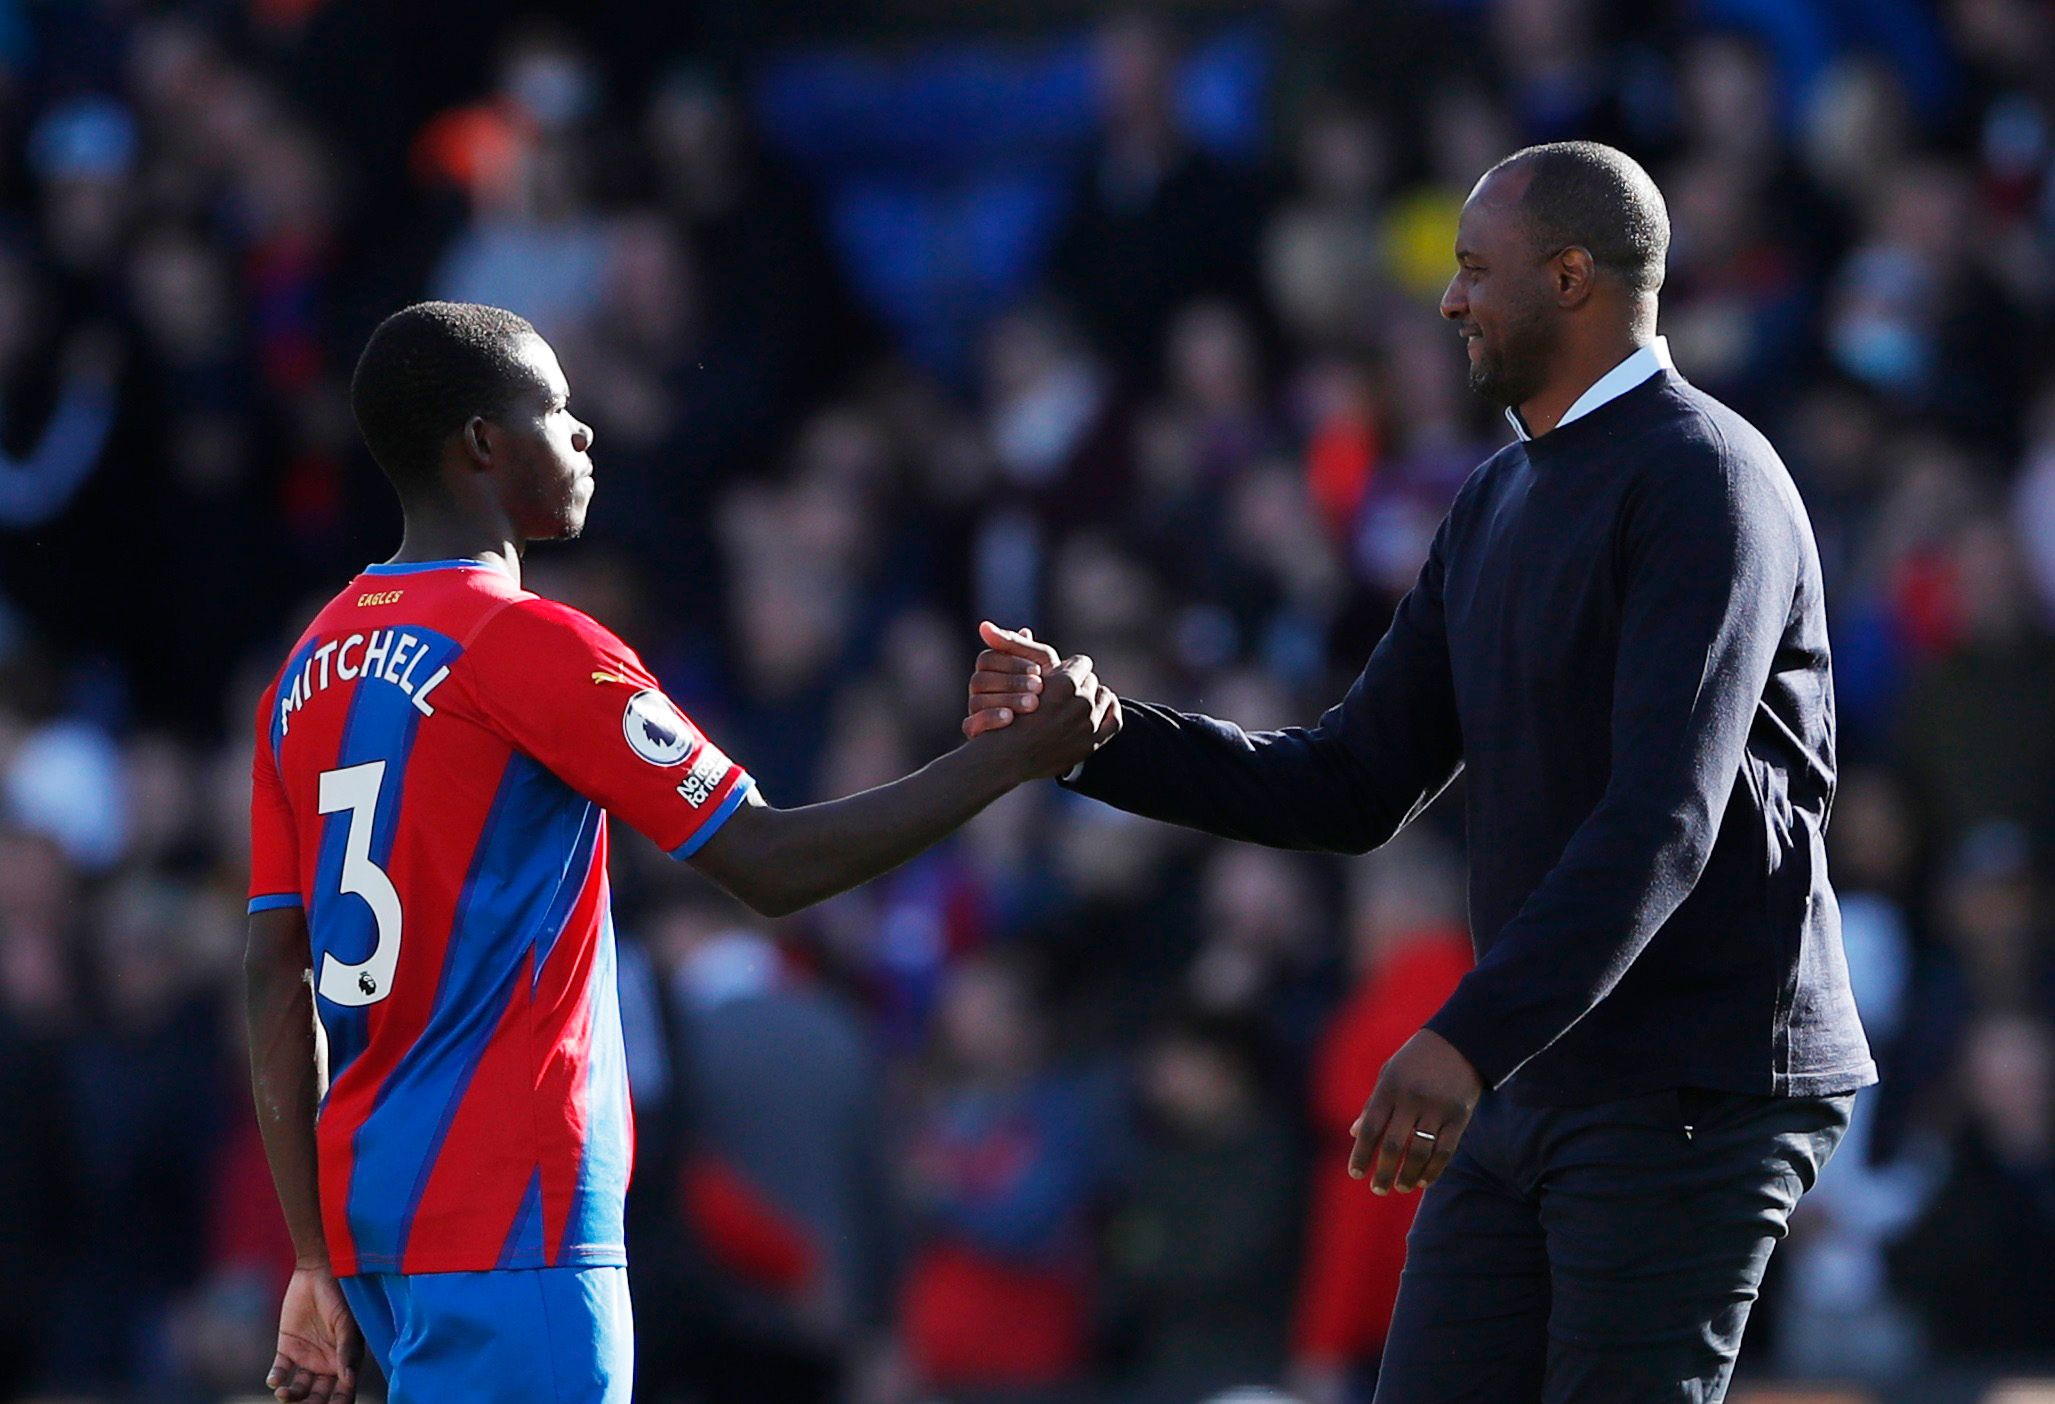 Soccer Football - Premier League - Crystal Palace v Leicester City - Selhurst Park, London, Britain - October 3, 2021 Crystal Palace's Tyrick Mitchell shakes hands with  manager Patrick Vieira after the match Action Images via Reuters/Andrew Couldridge EDITORIAL USE ONLY. No use with unauthorized audio, video, data, fixture lists, club/league logos or 'live' services. Online in-match use limited to 75 images, no video emulation. No use in betting, games or single club /league/player publications